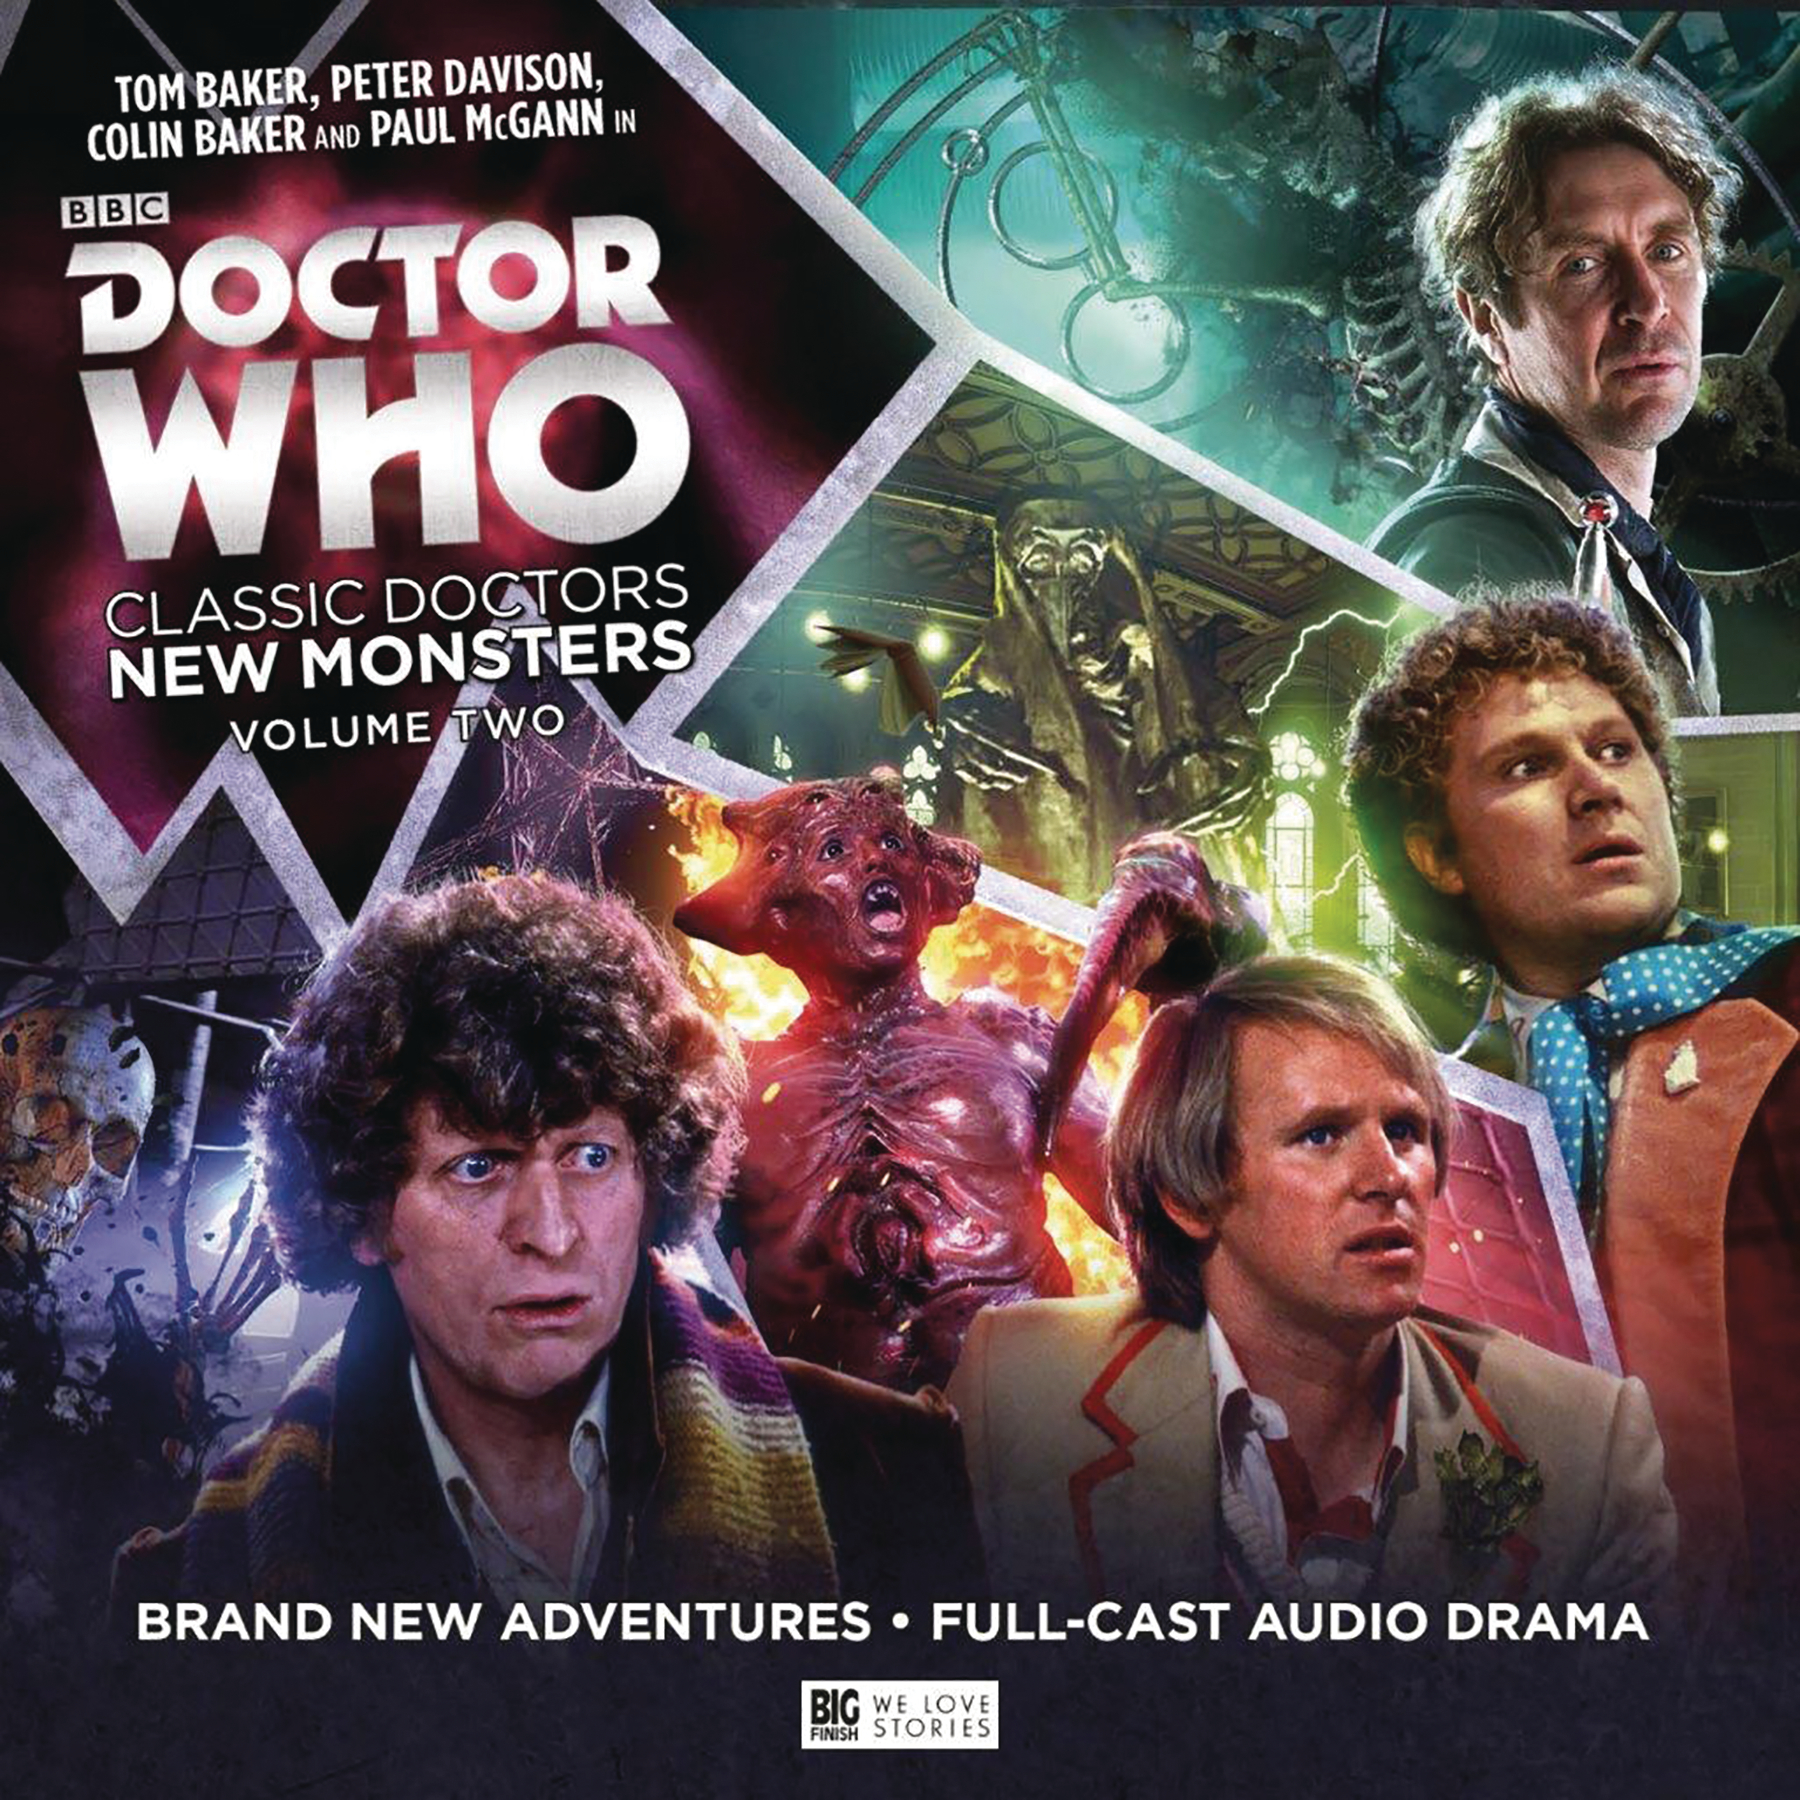 DOCTOR WHO CLASSIC DOCTORS NEW MONSTER 2 AUDIO CD